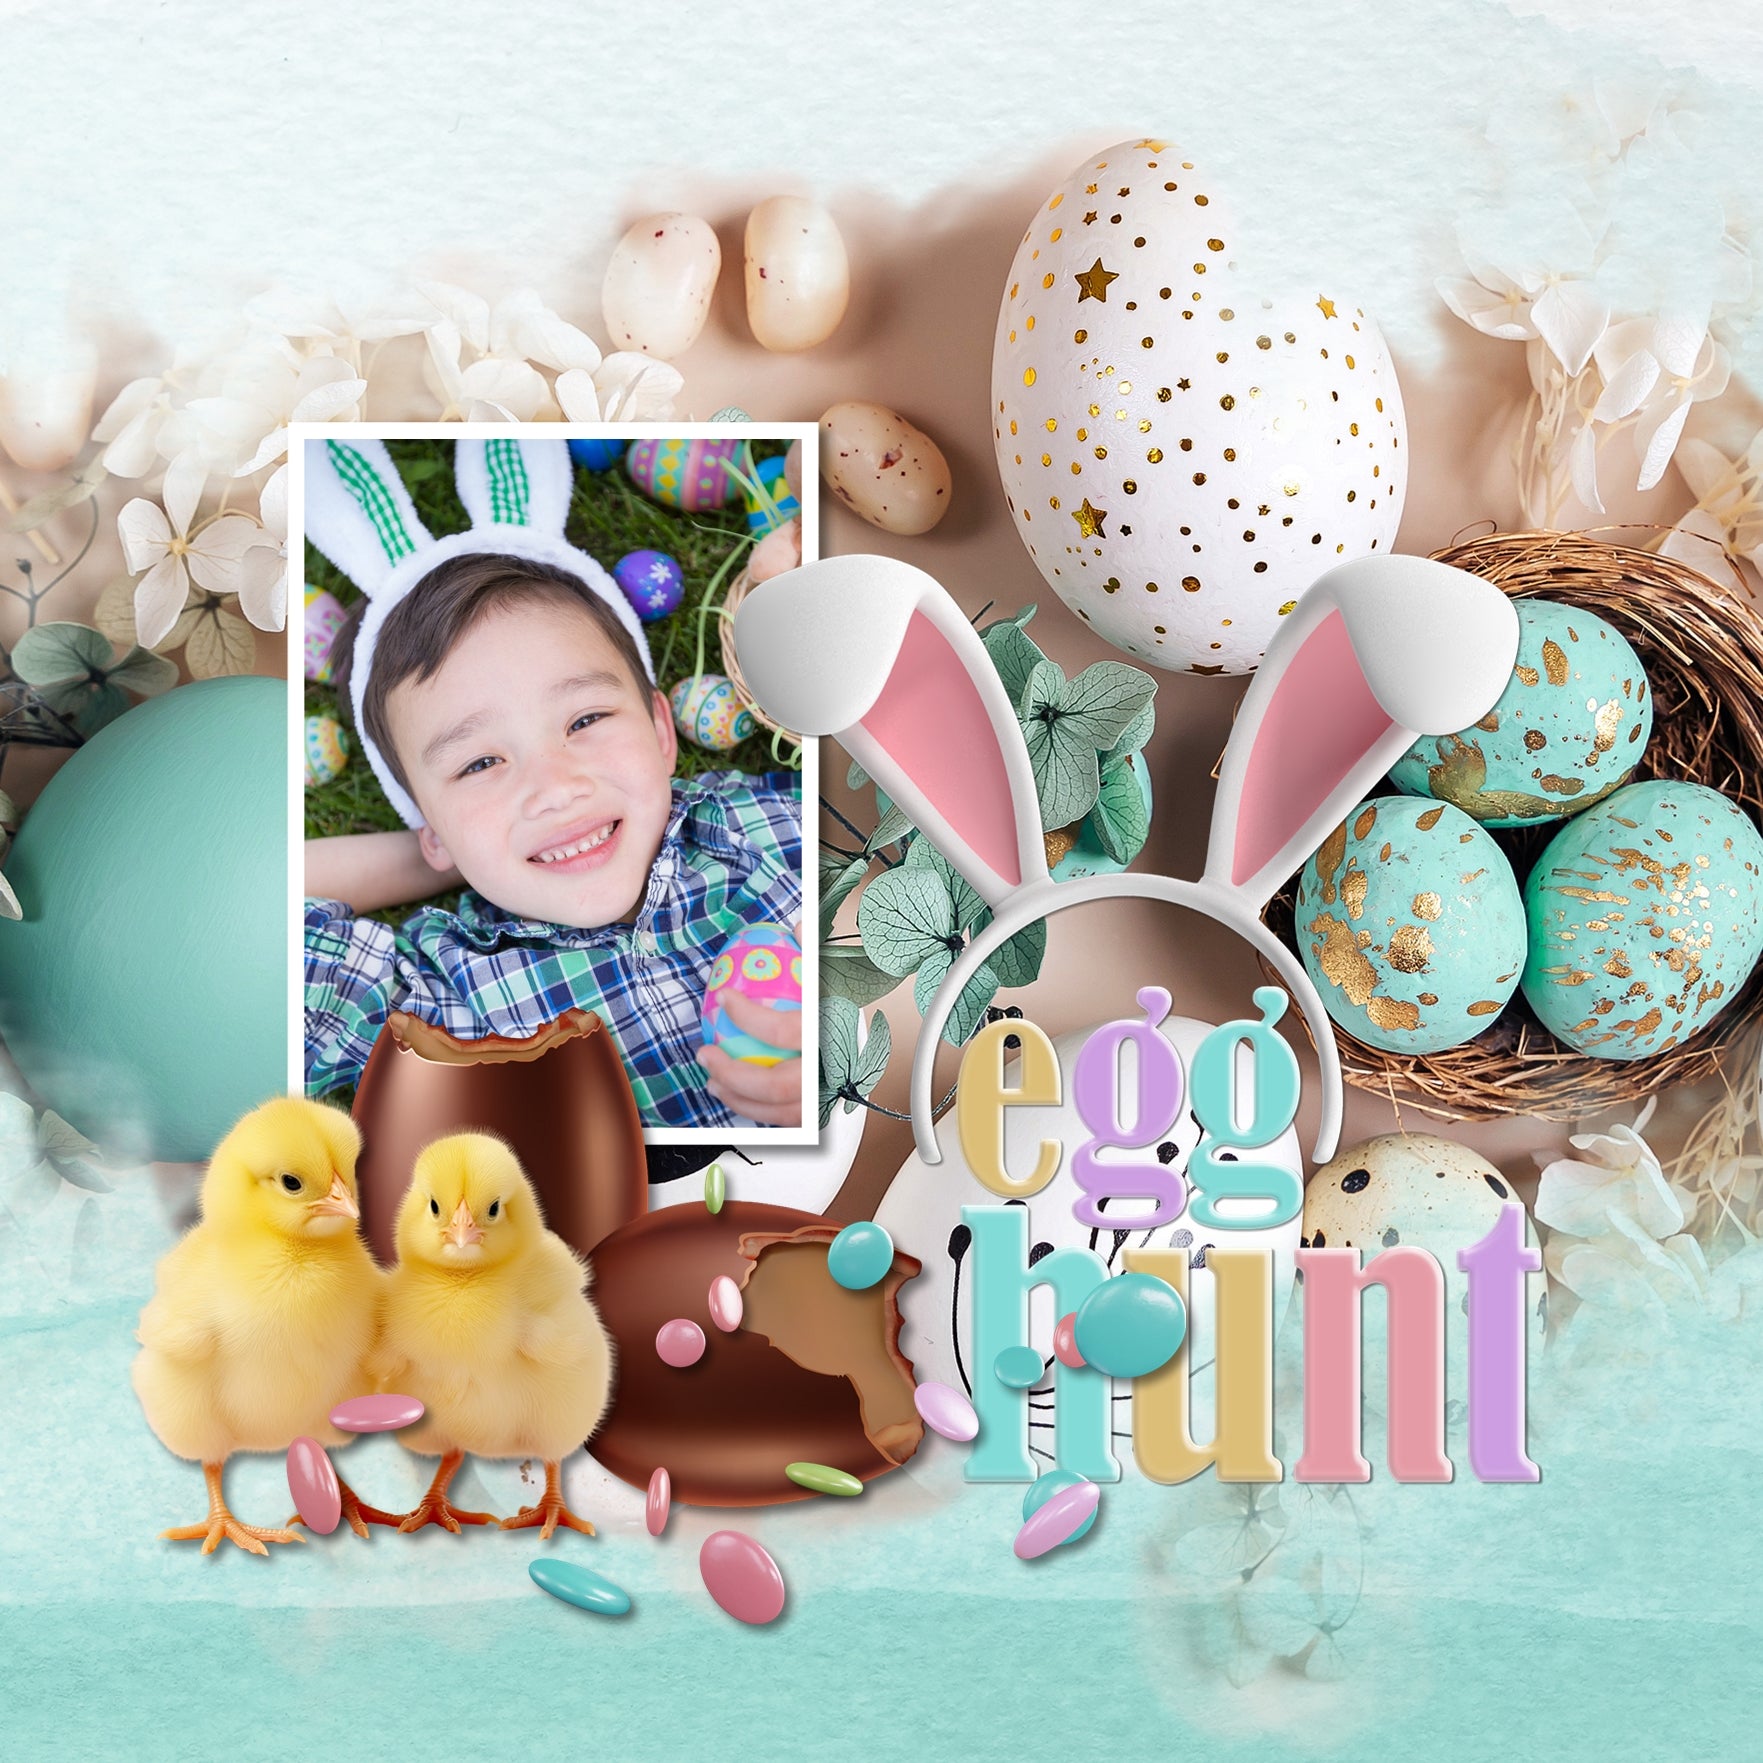 These fun and bright realistic digital scrapbooking embellishments and watercolor papers by Lucky Girl Creative digital art are perfect for all your Easter, spring, and flower garden pages. Imagine the cute Easter Egg Hunt and Easter Bunny pages you could make!